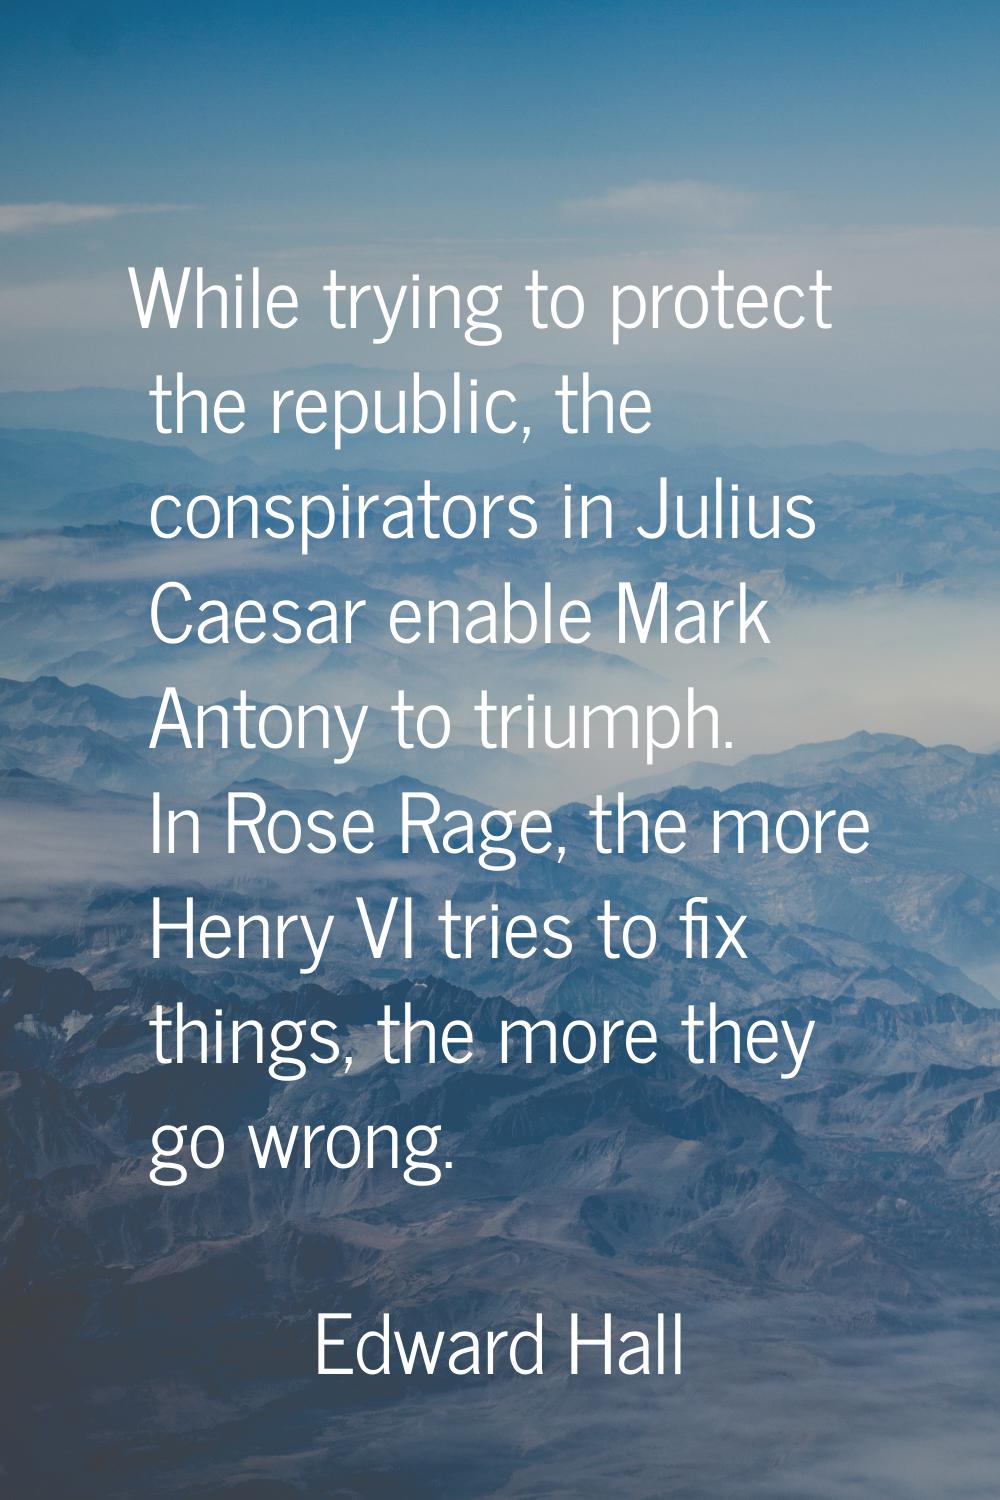 While trying to protect the republic, the conspirators in Julius Caesar enable Mark Antony to trium